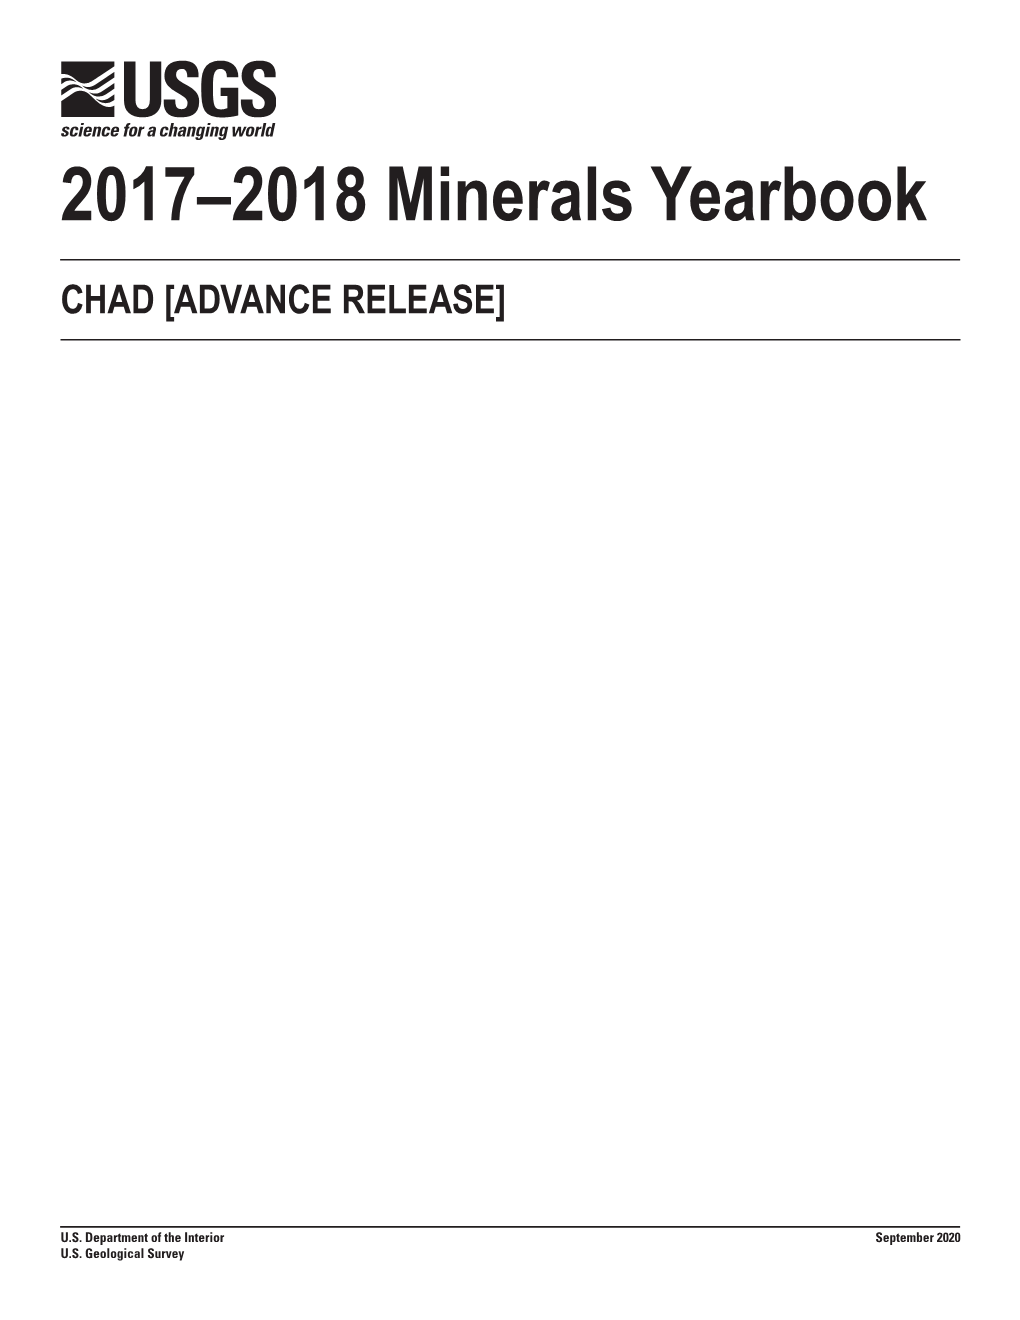 The Mineral Industry of Chad in 2017-2018